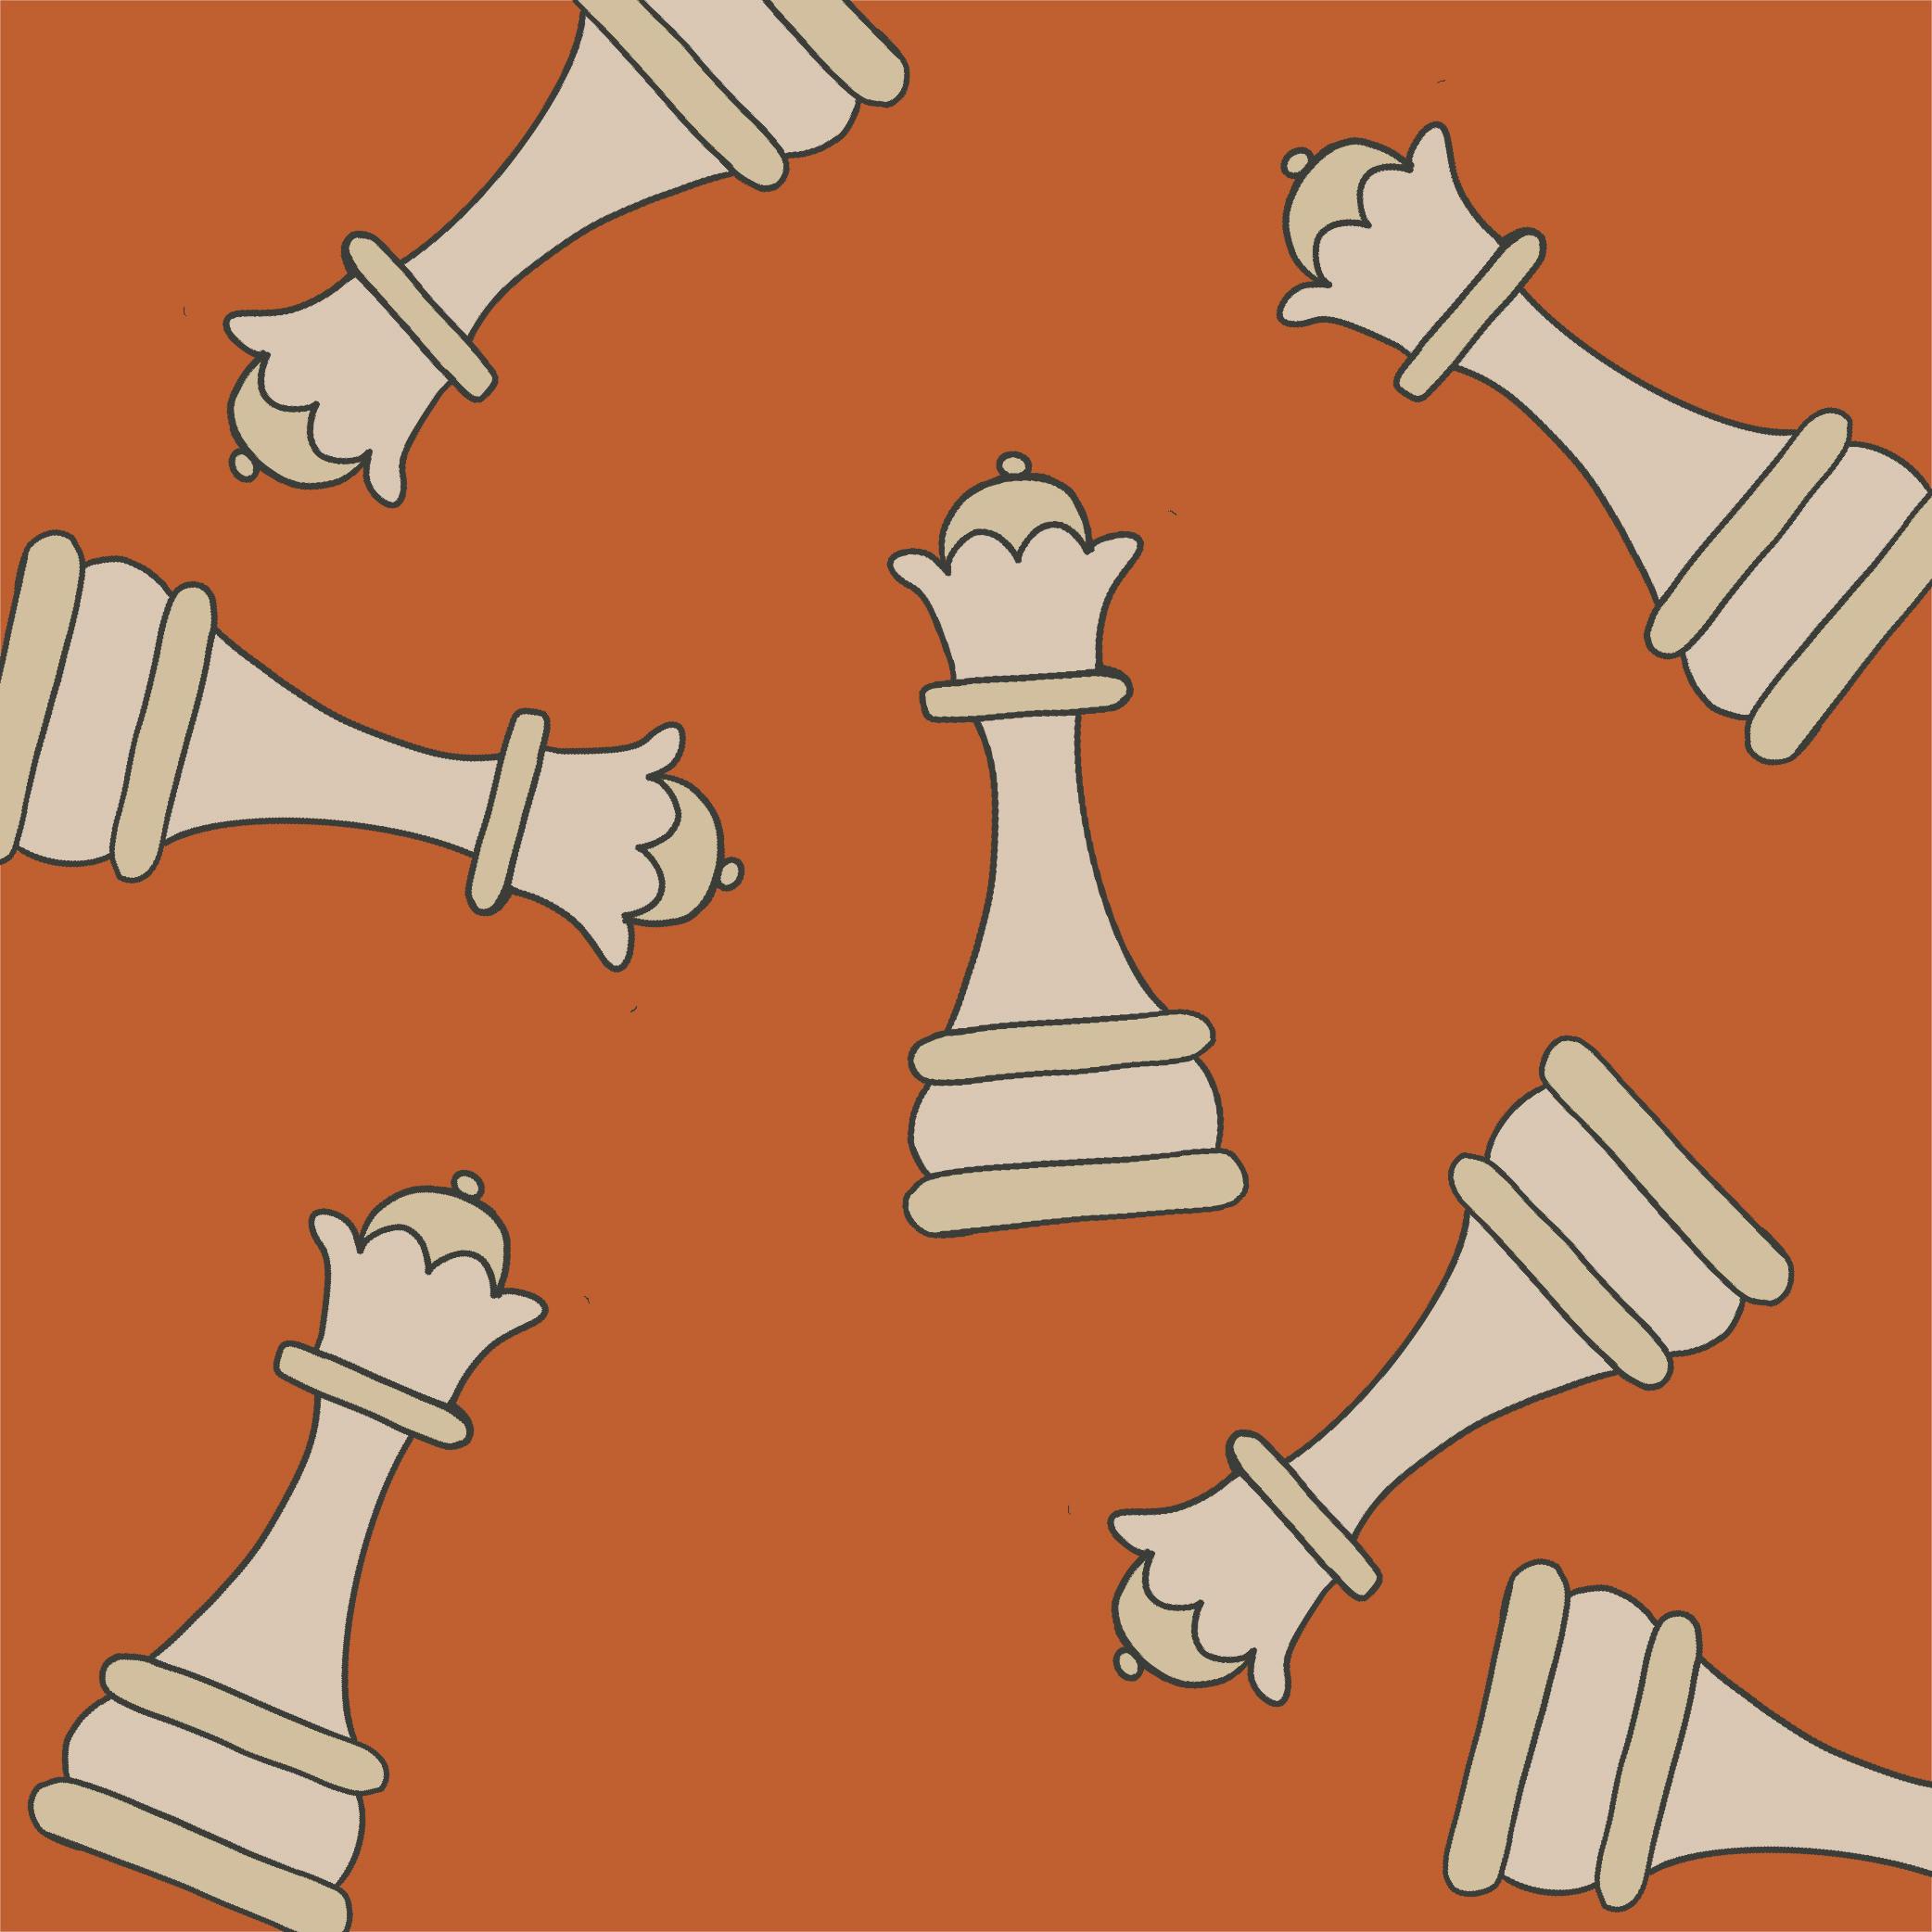 Sketches of chess pieces on an orange background